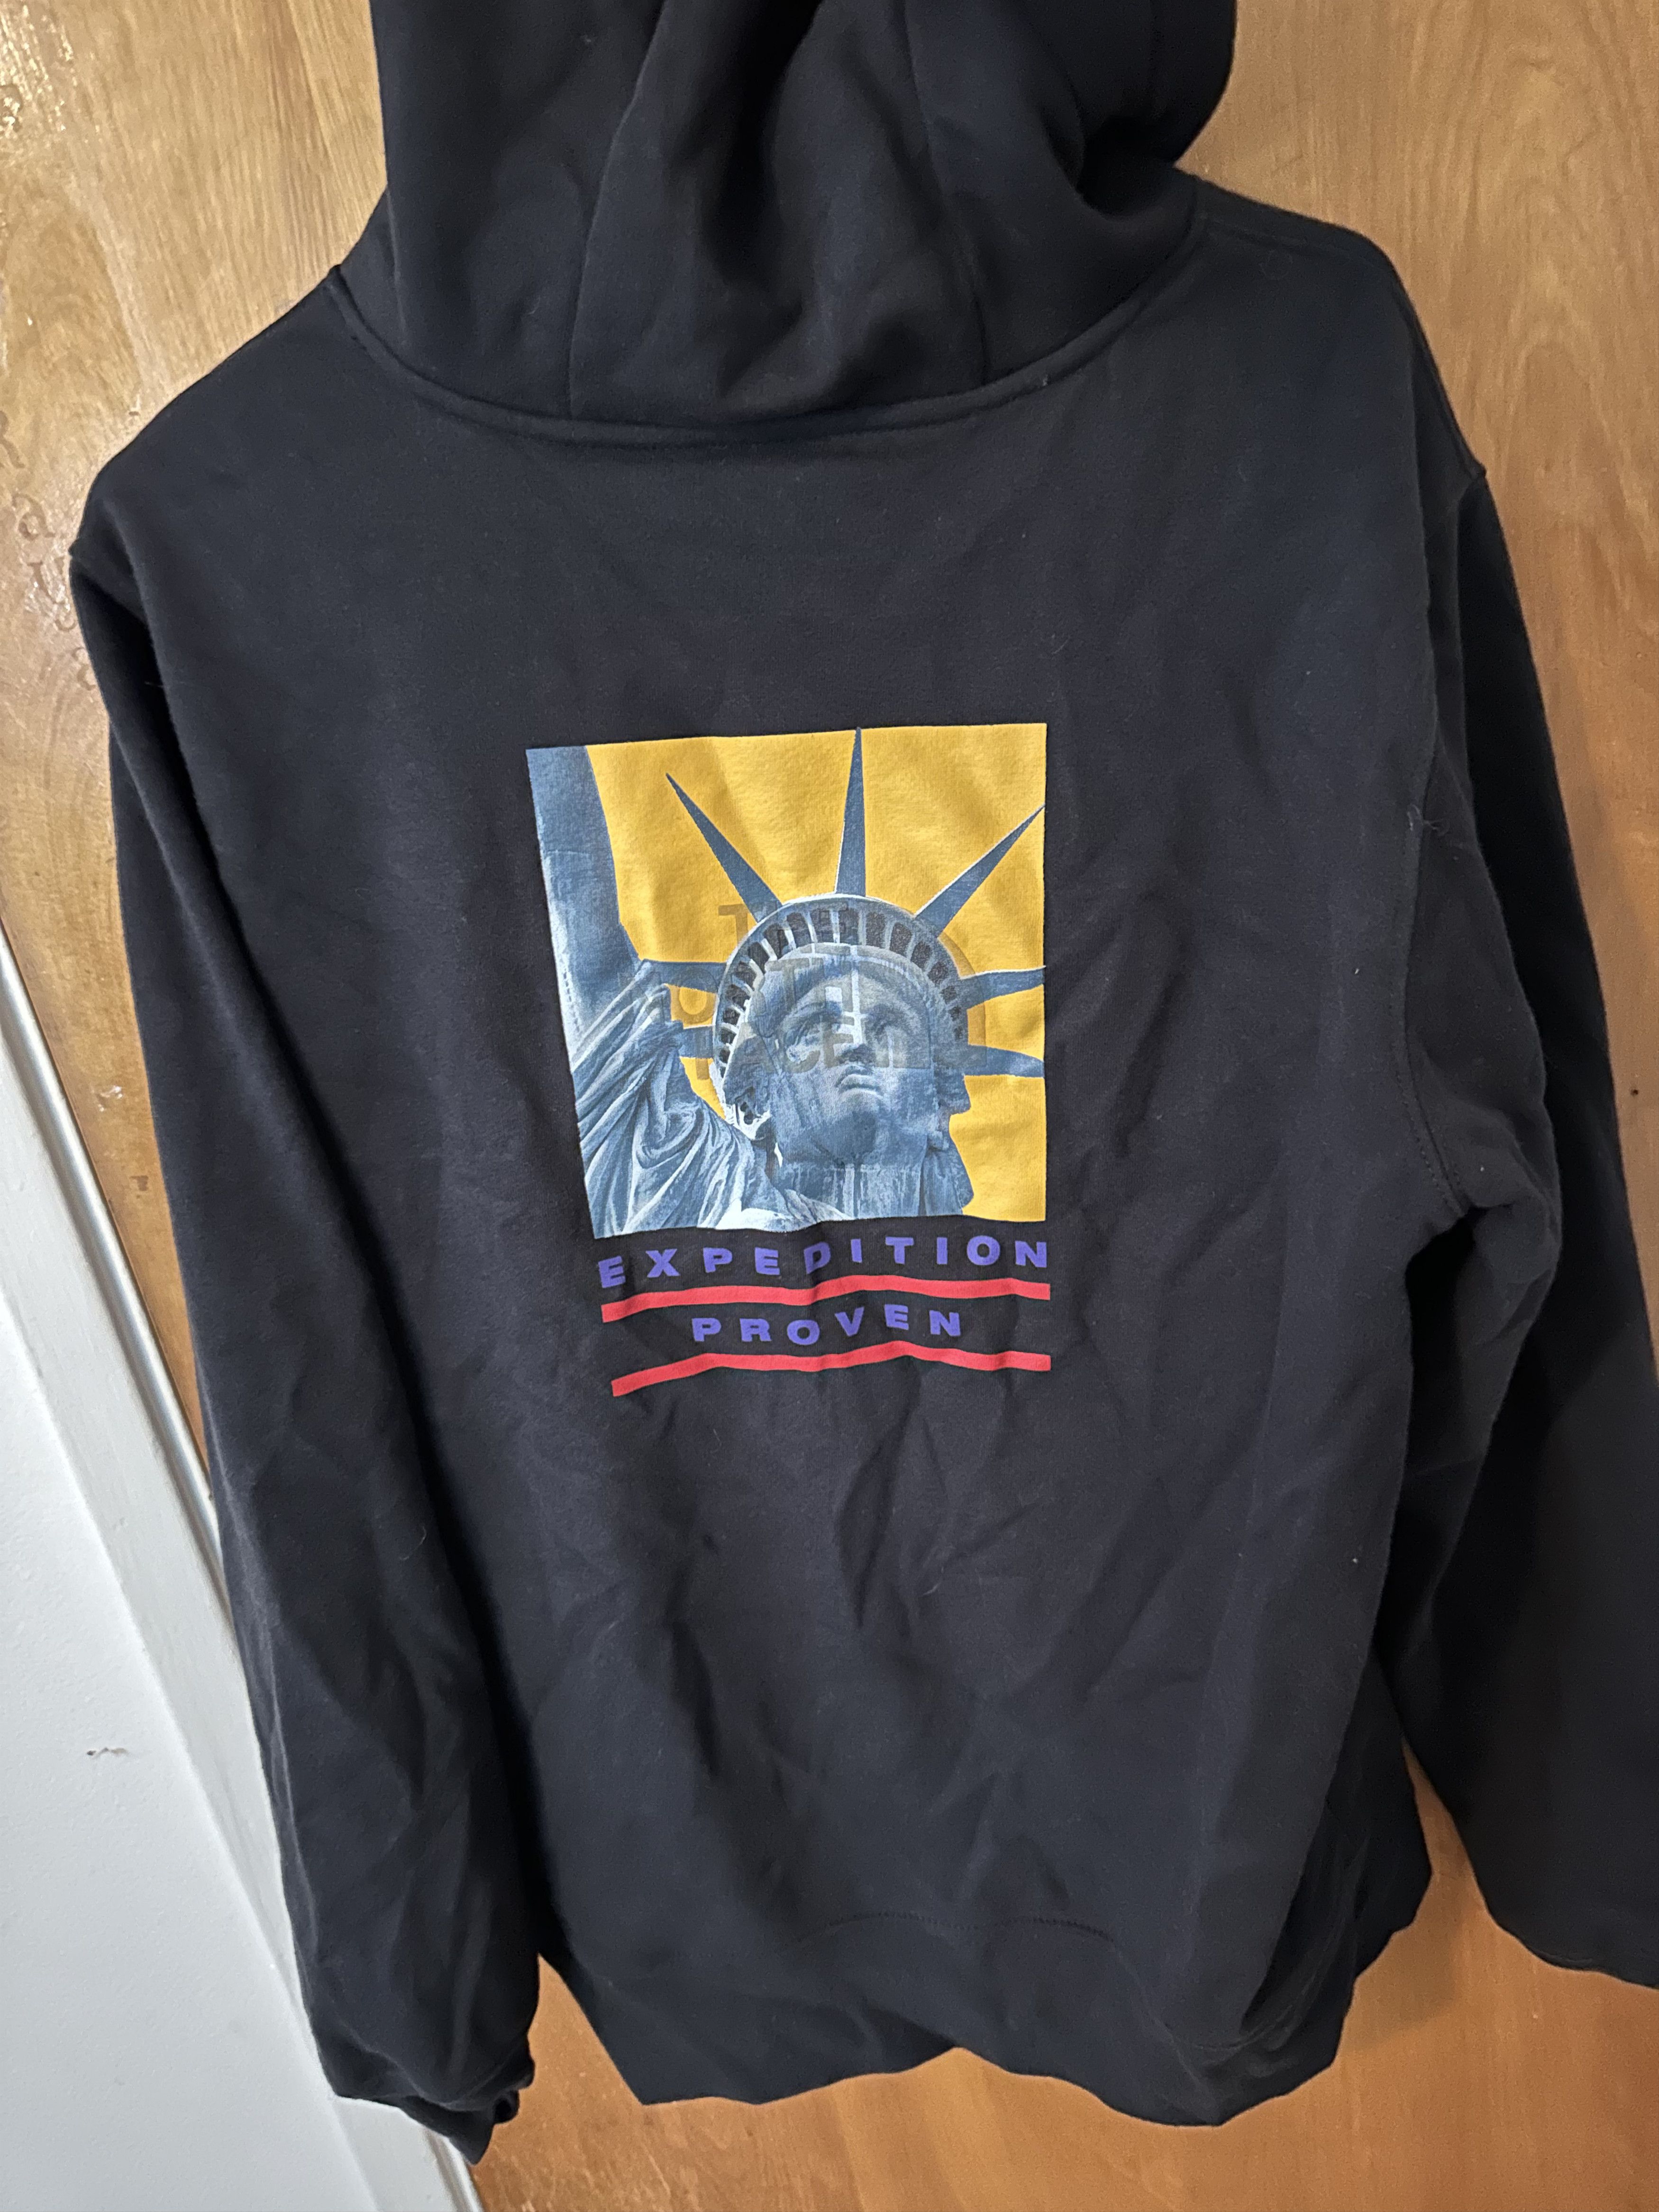 Supreme Supreme The North Face Statue of Liberty Hooded Sweatshirt | Grailed